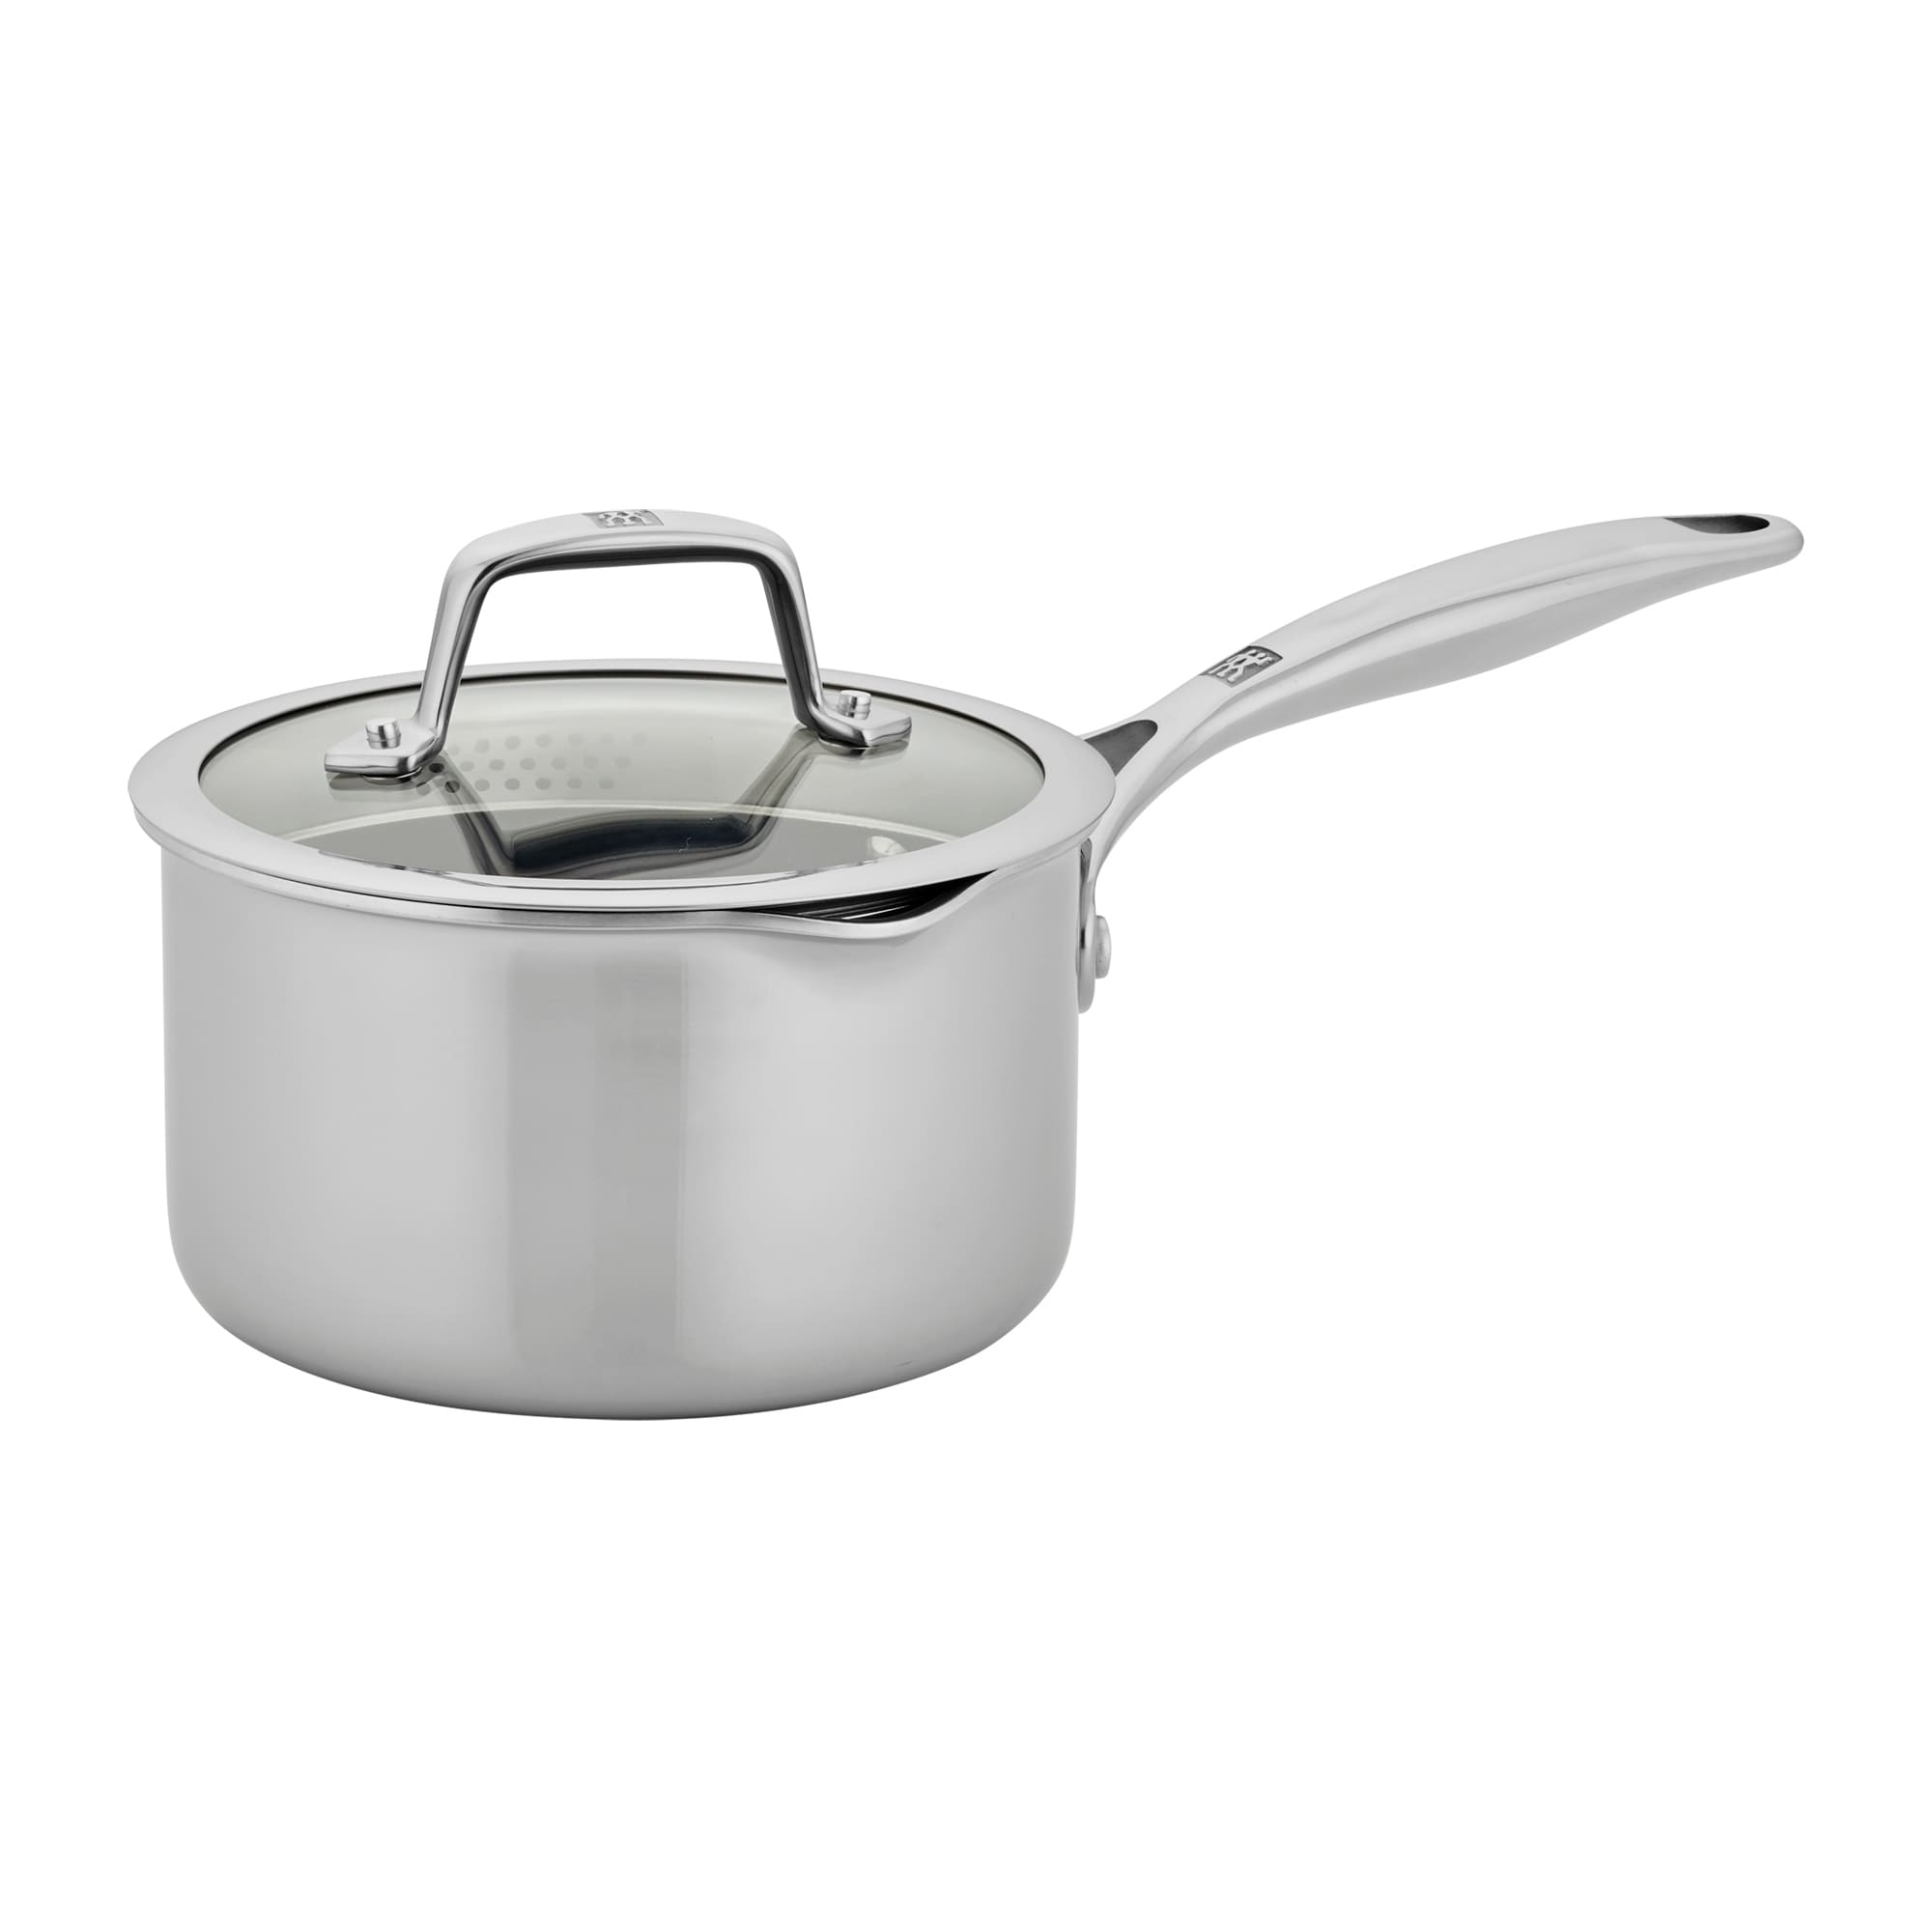 https://ak1.ostkcdn.com/images/products/is/images/direct/cb05583f4b5973a10efe9345bb710e26b5e0028e/ZWILLING-Energy-Plus-2-qt-Stainless-Steel-Ceramic-Nonstick-Tall-Saucepan.jpg